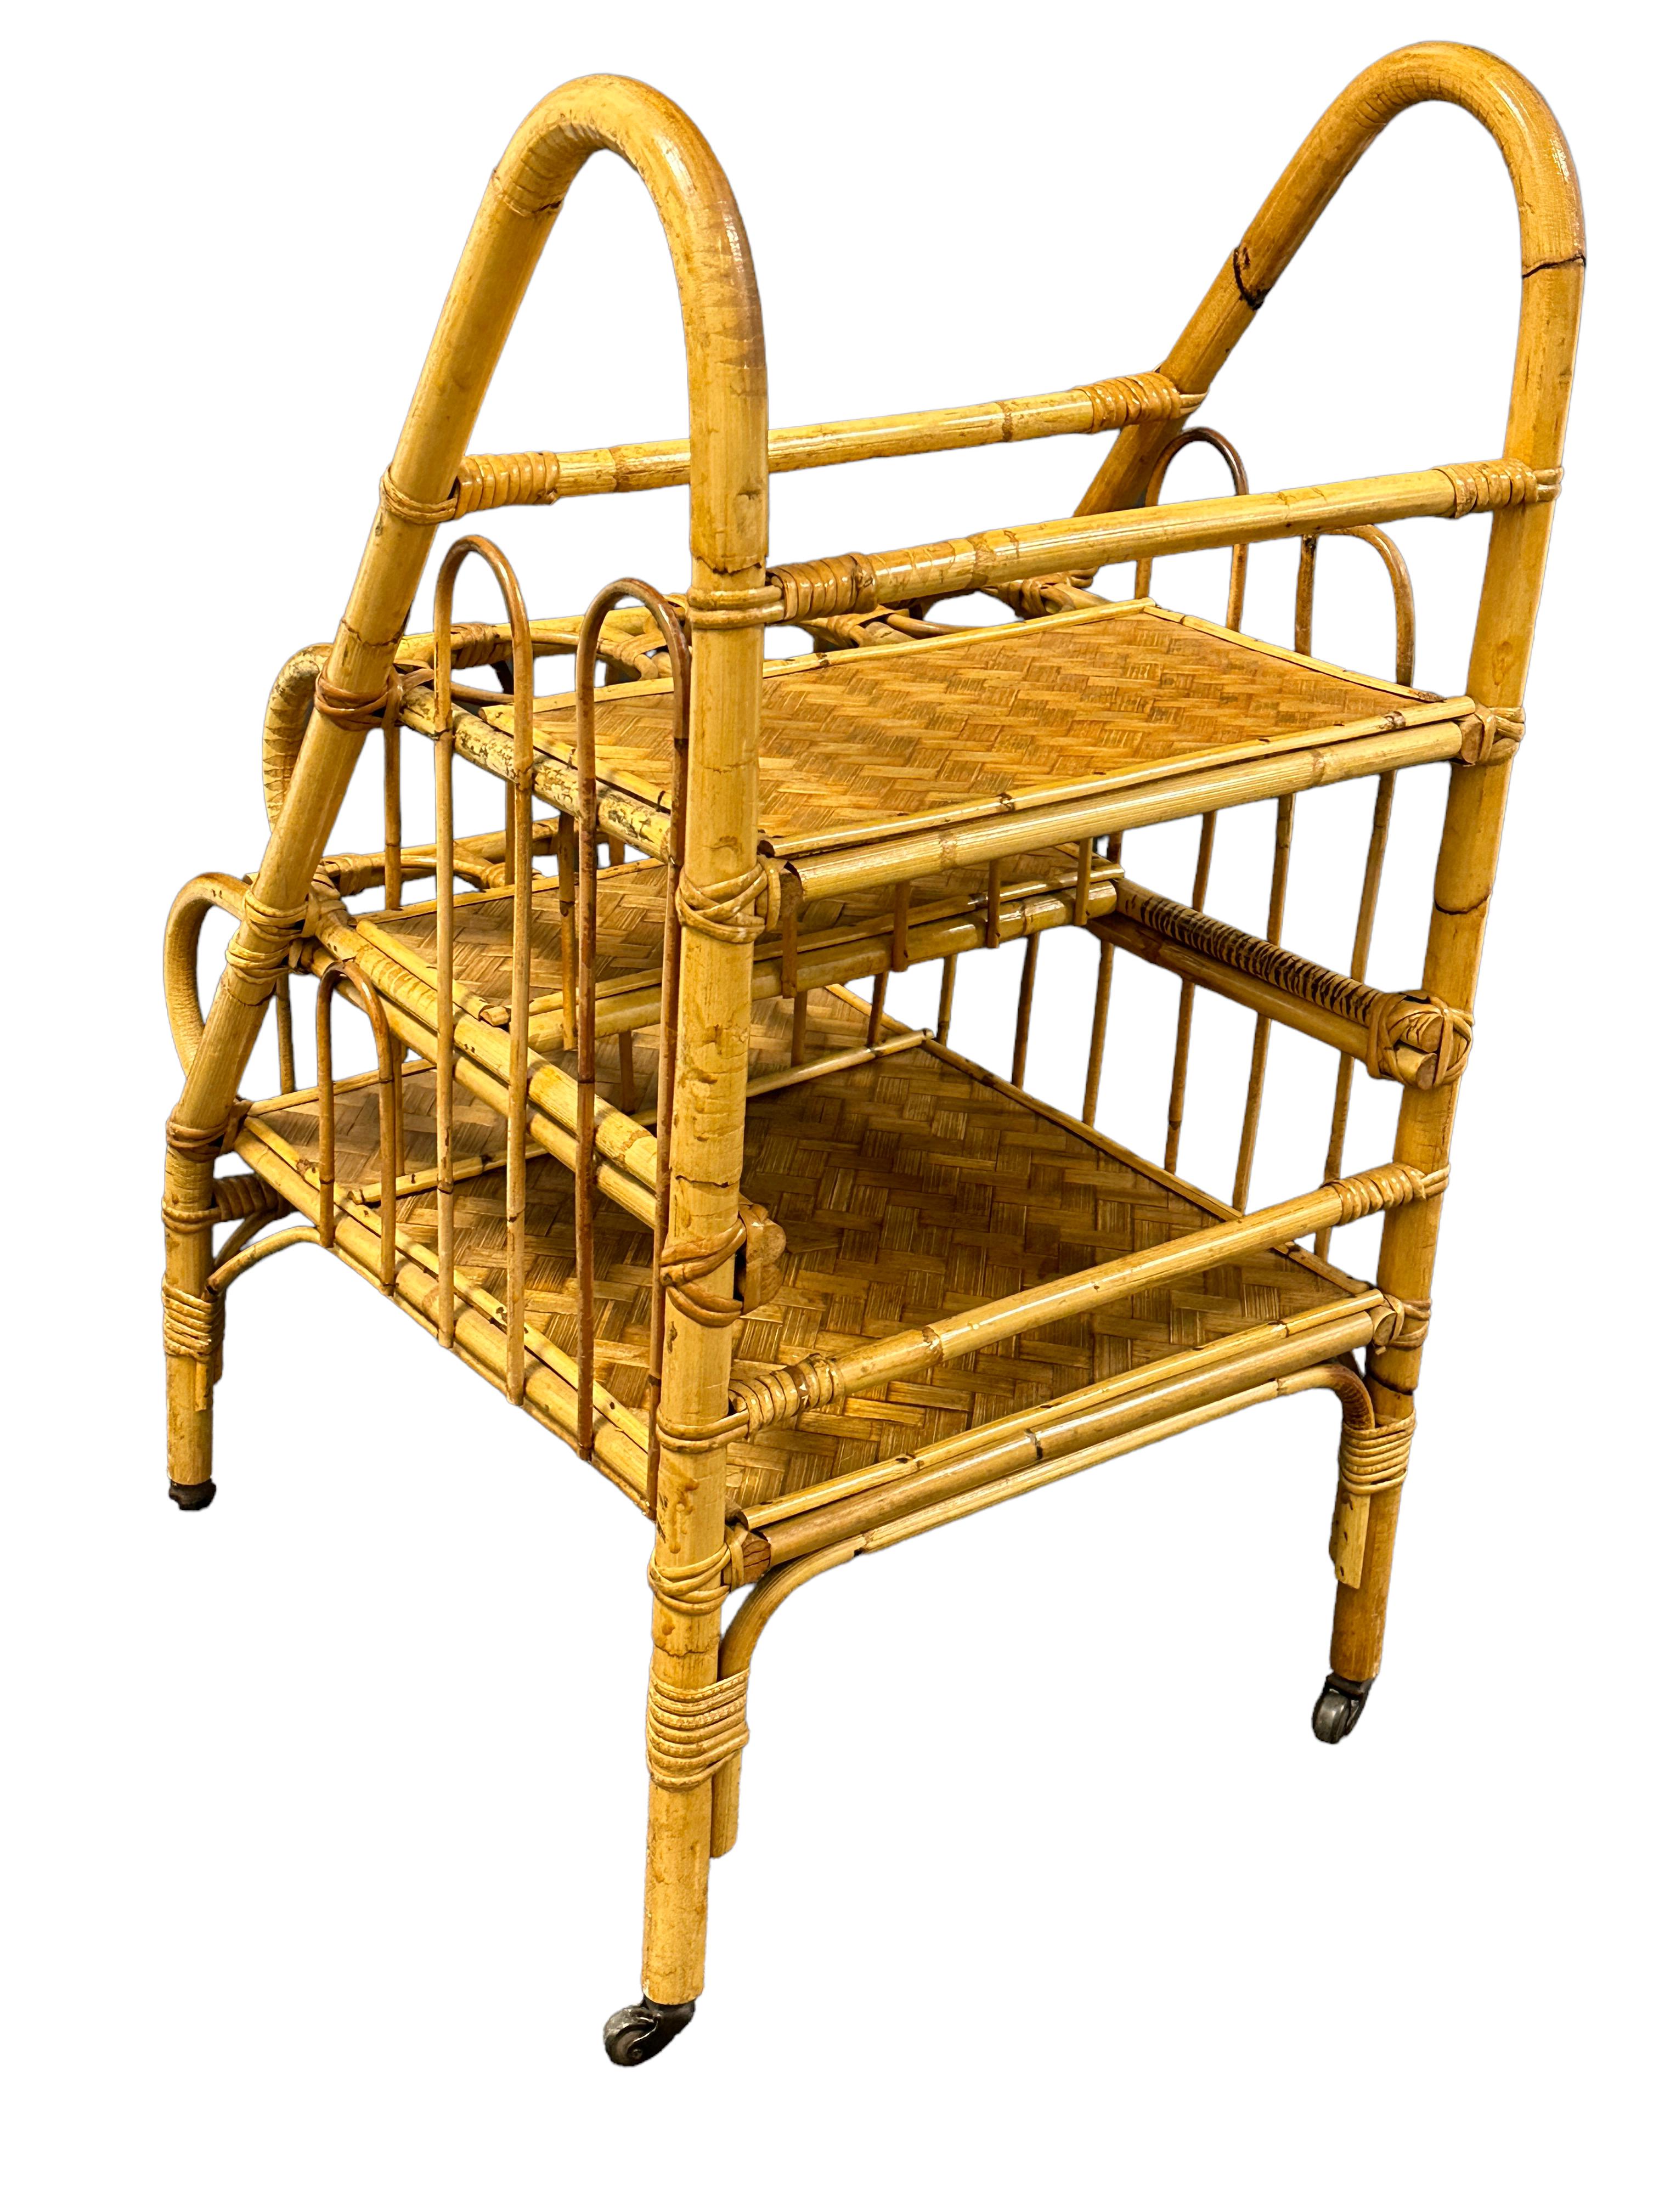 Vivai del Sud Bamboo Wicker Bar Cart Drinks Vine Bottle Stand, Vintage Italy In Good Condition For Sale In Nuernberg, DE